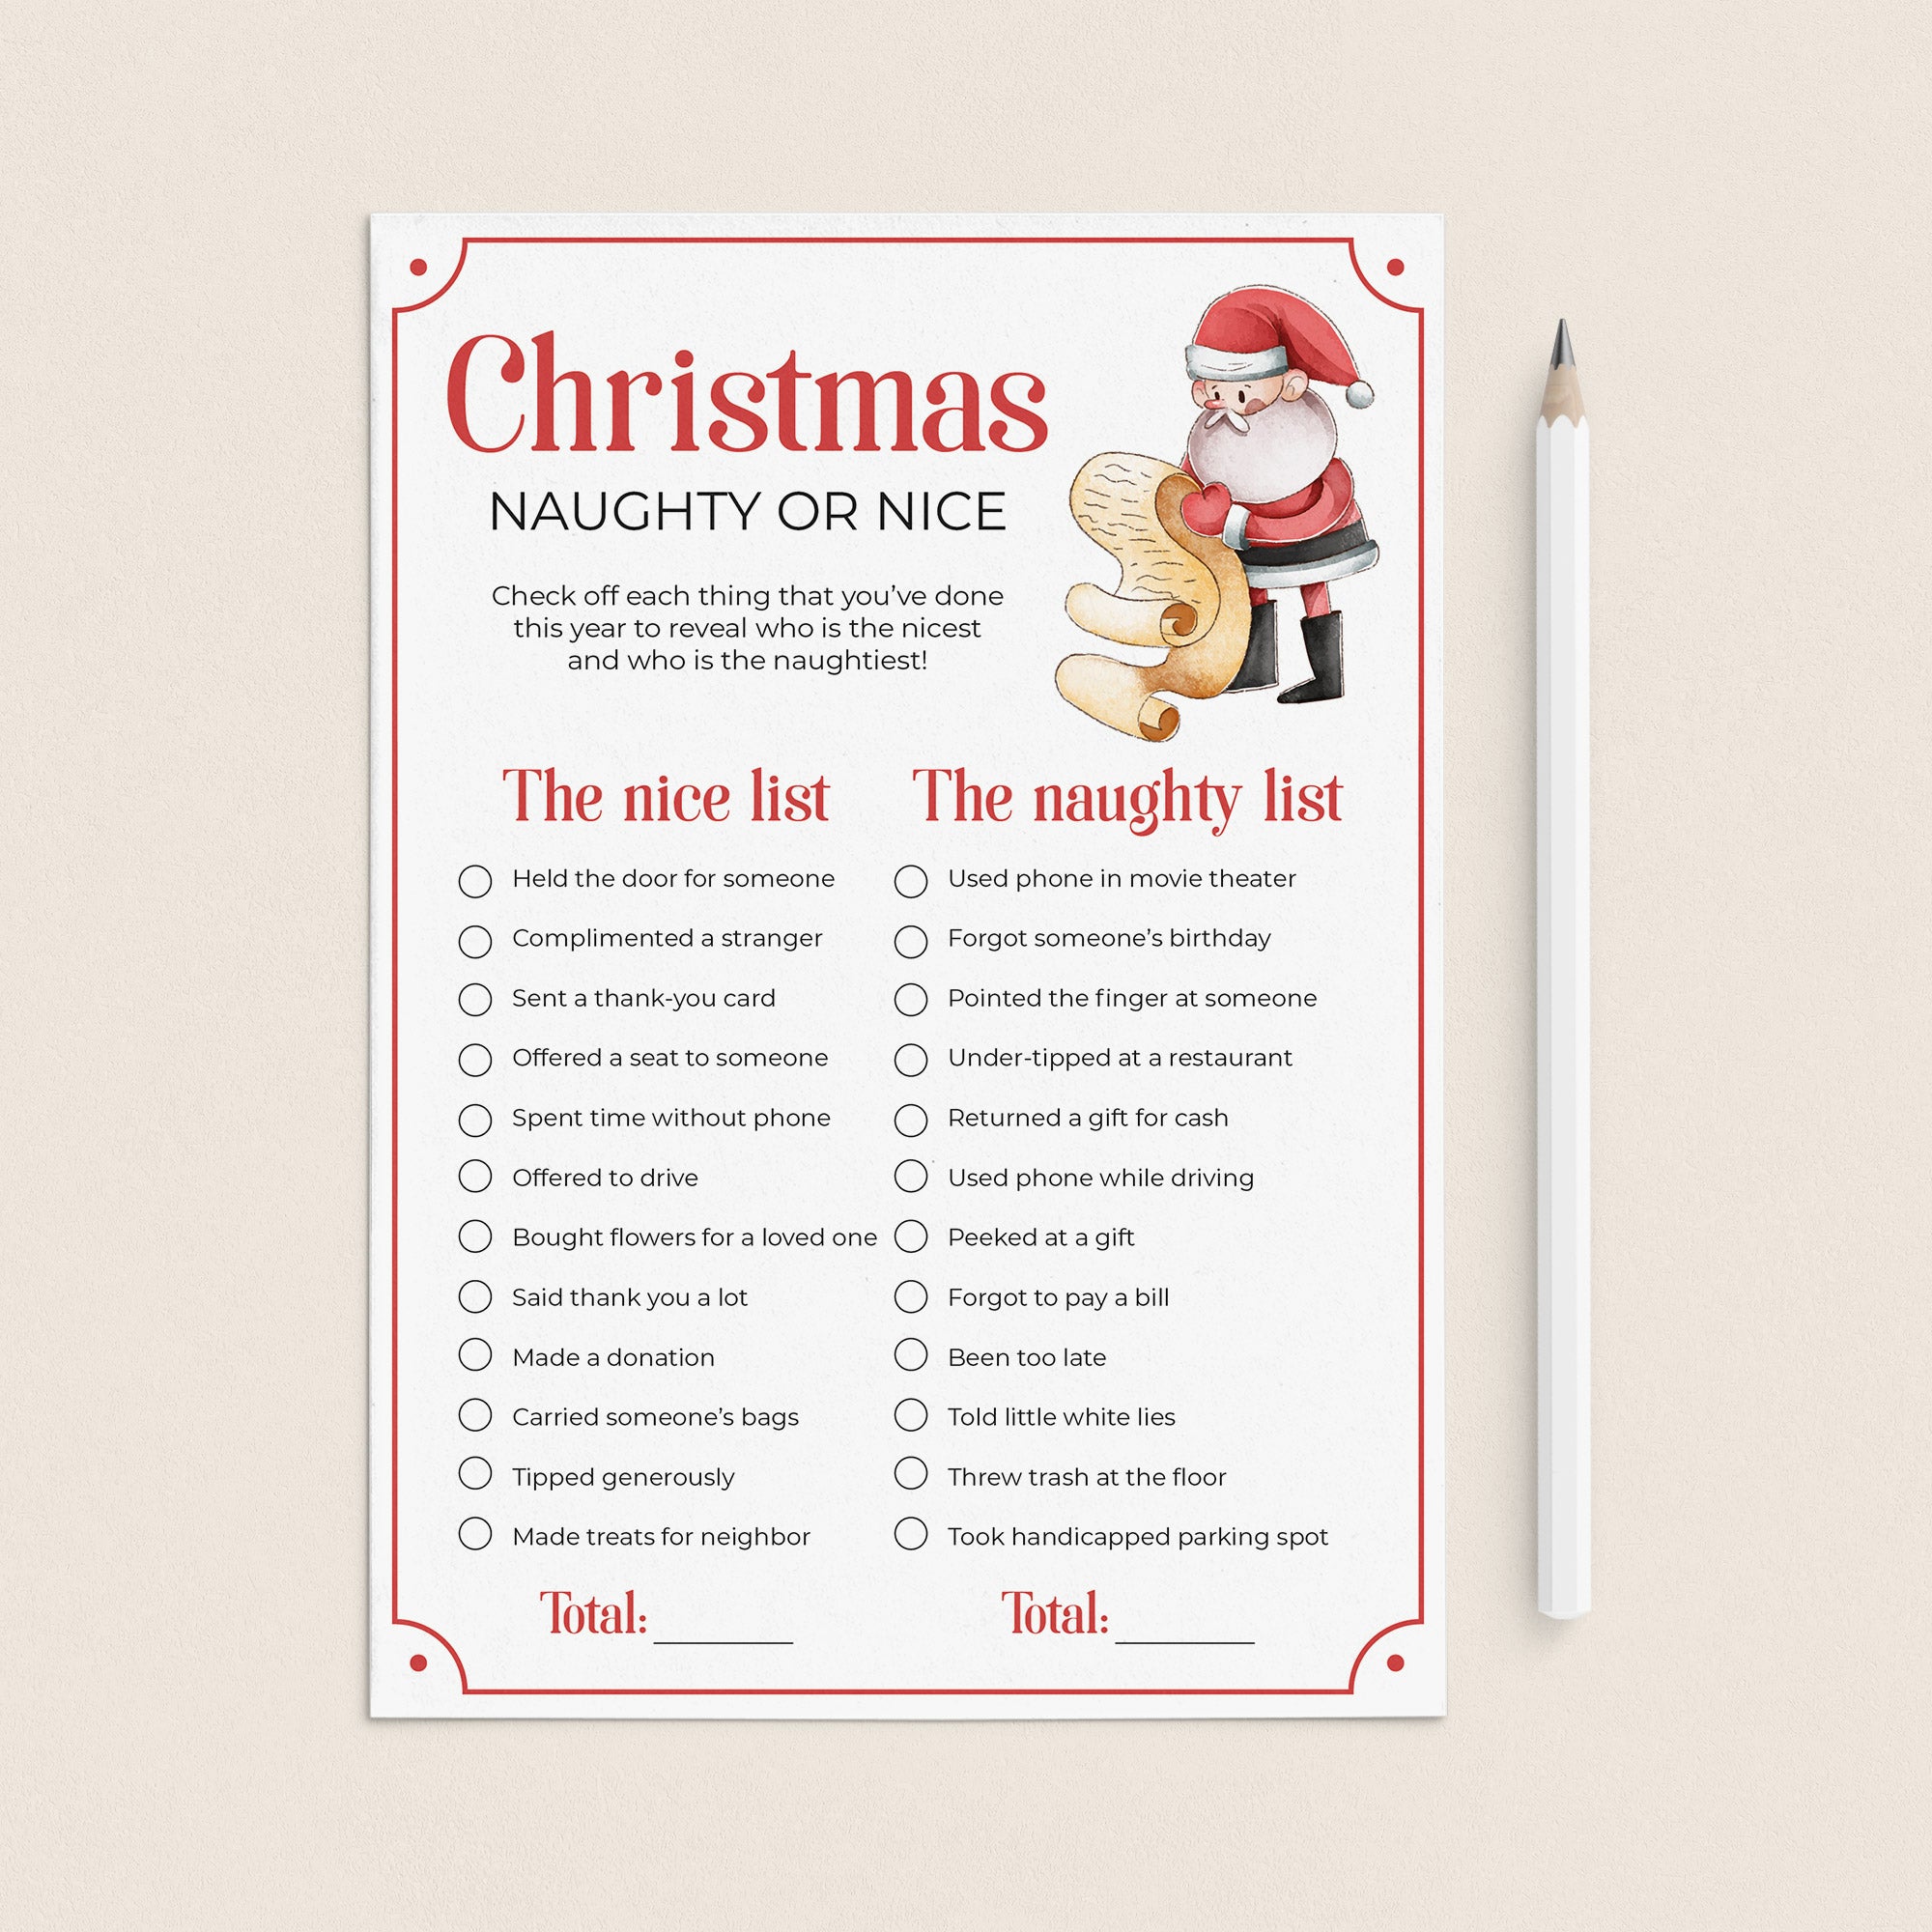 Christmas Naughty or Nice List for Adults Printable by LittleSizzle